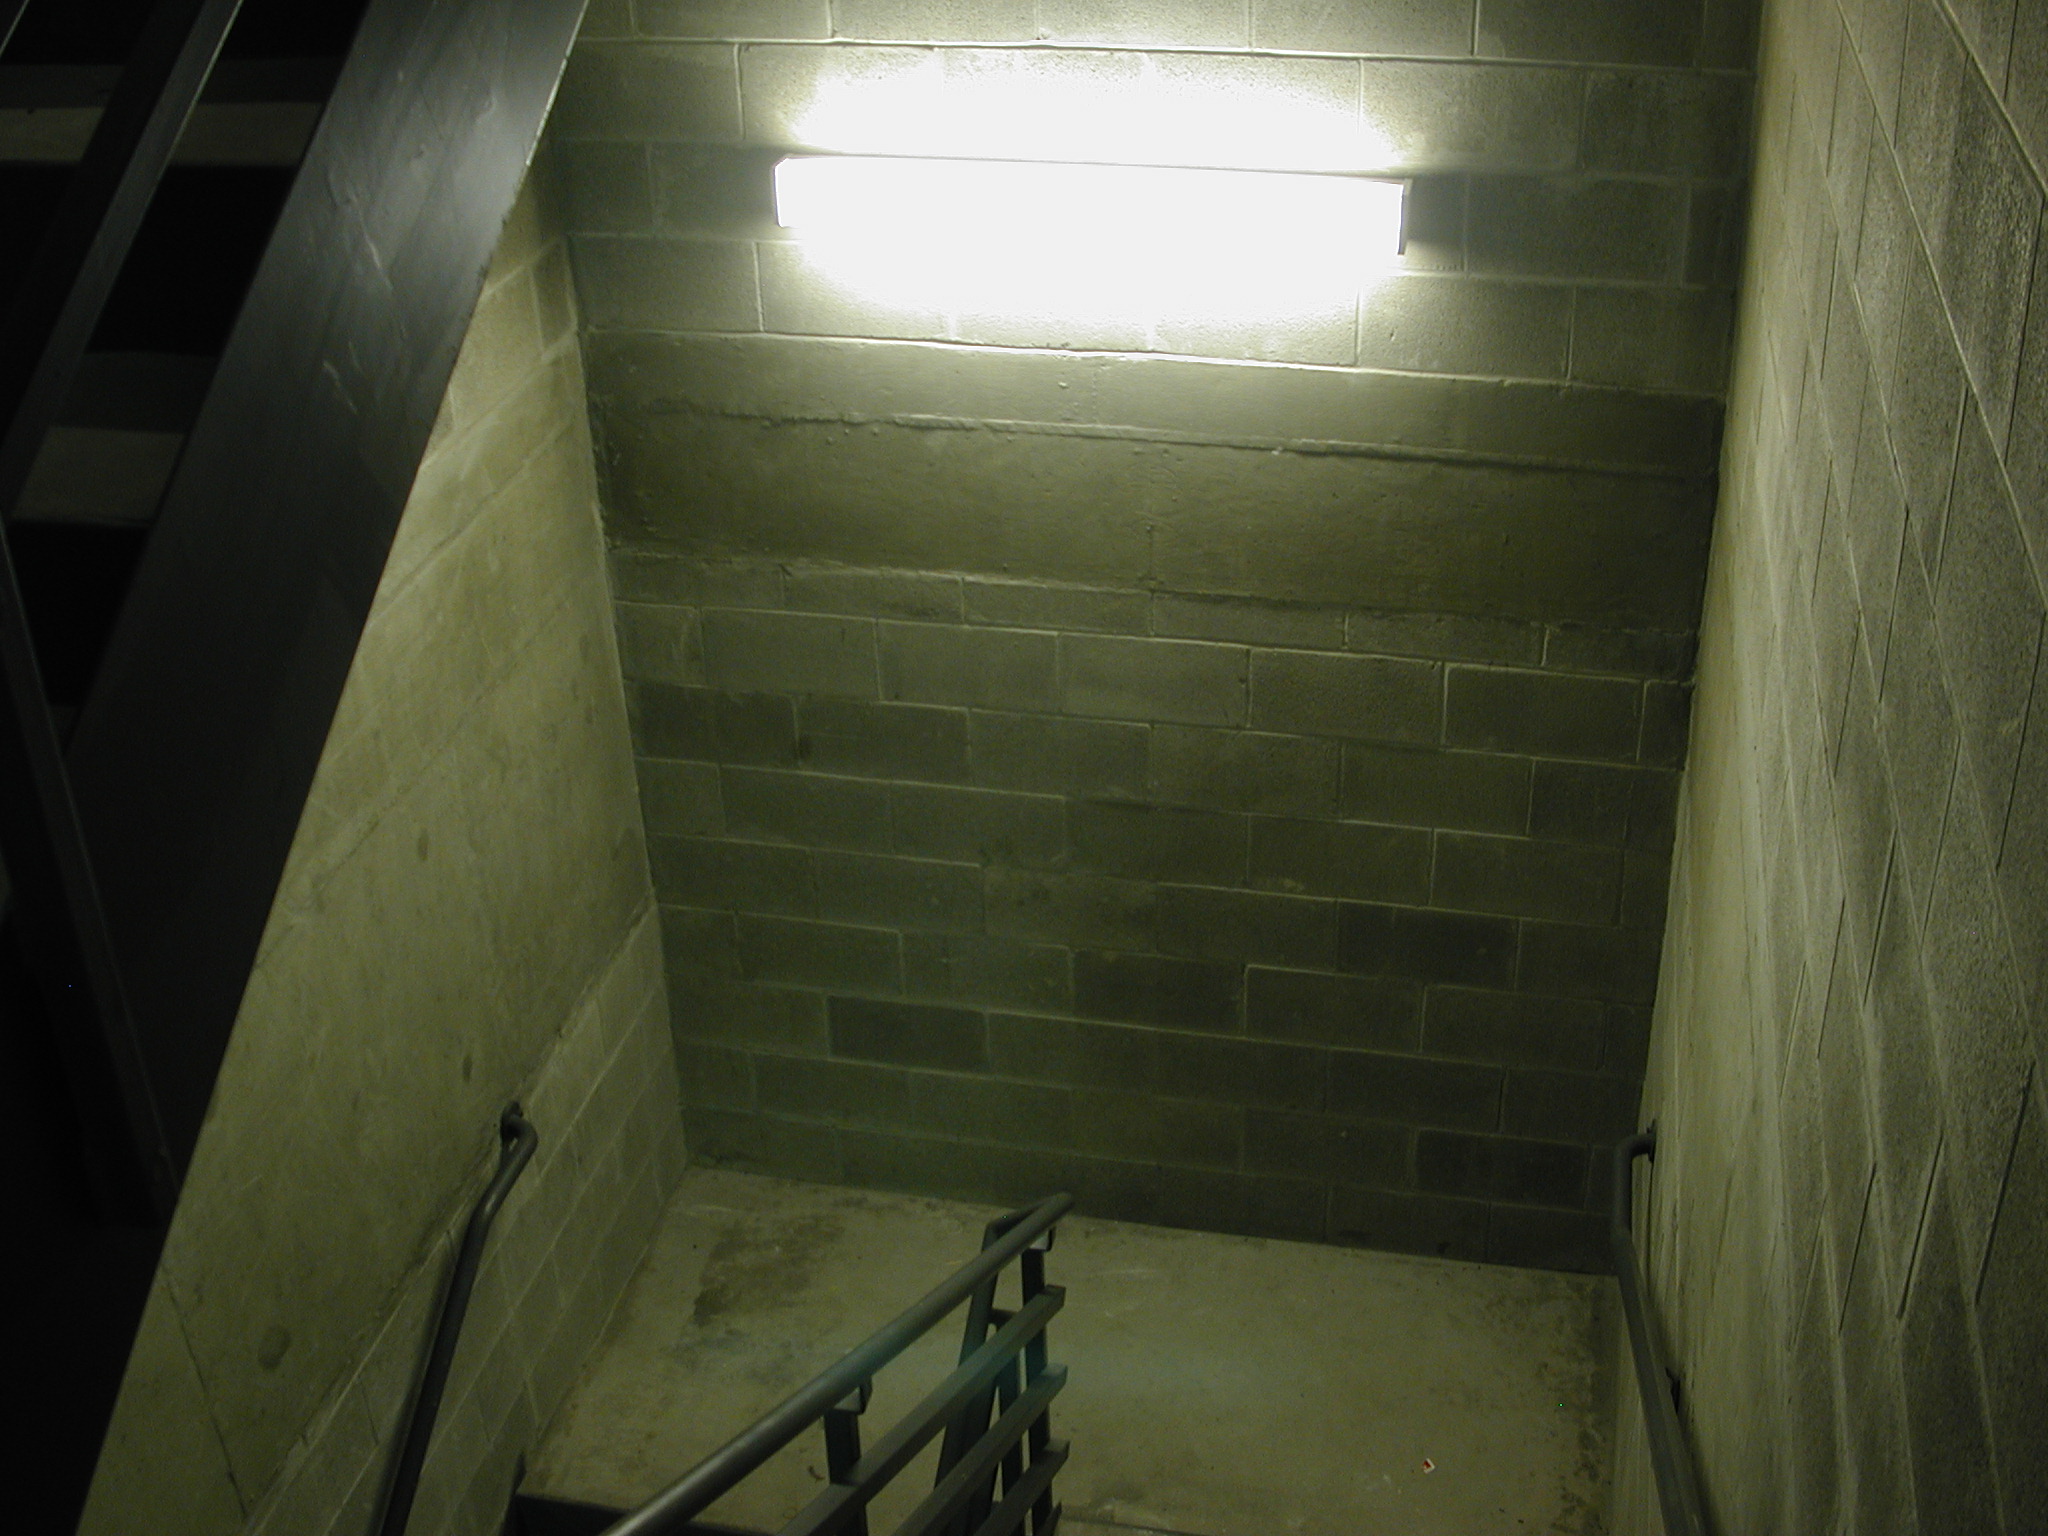 an open stairway at night, with bright light from above